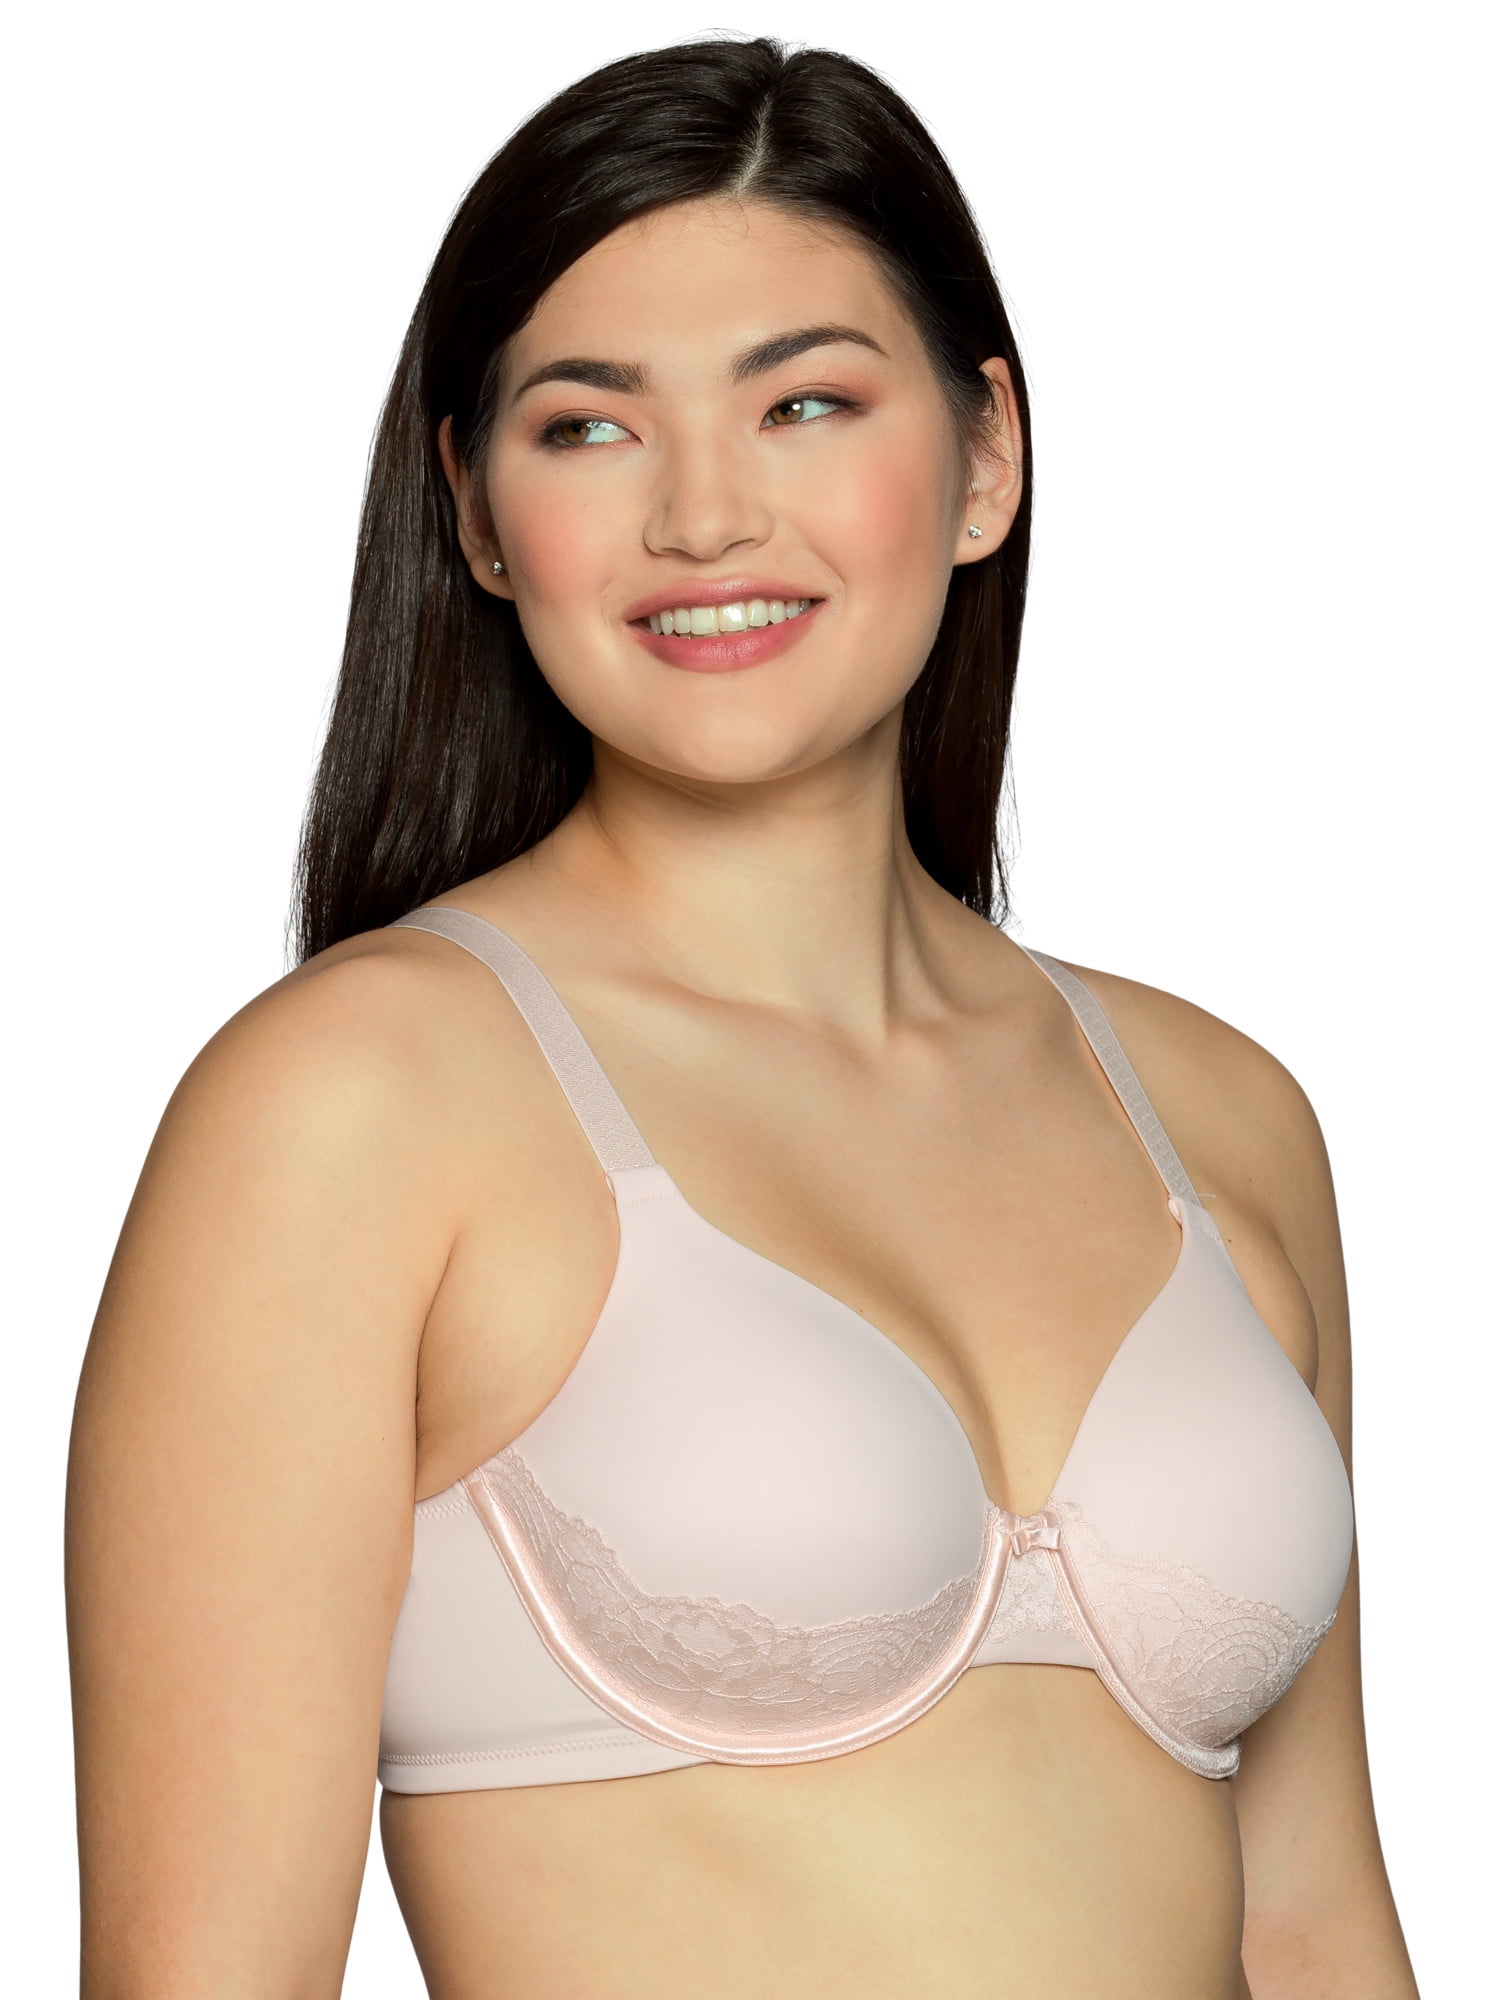 Buy Vanity Fair Women's Beauty Back Lace Full Figure Underwire Bra 76382,Toasted  Coconut,36C at